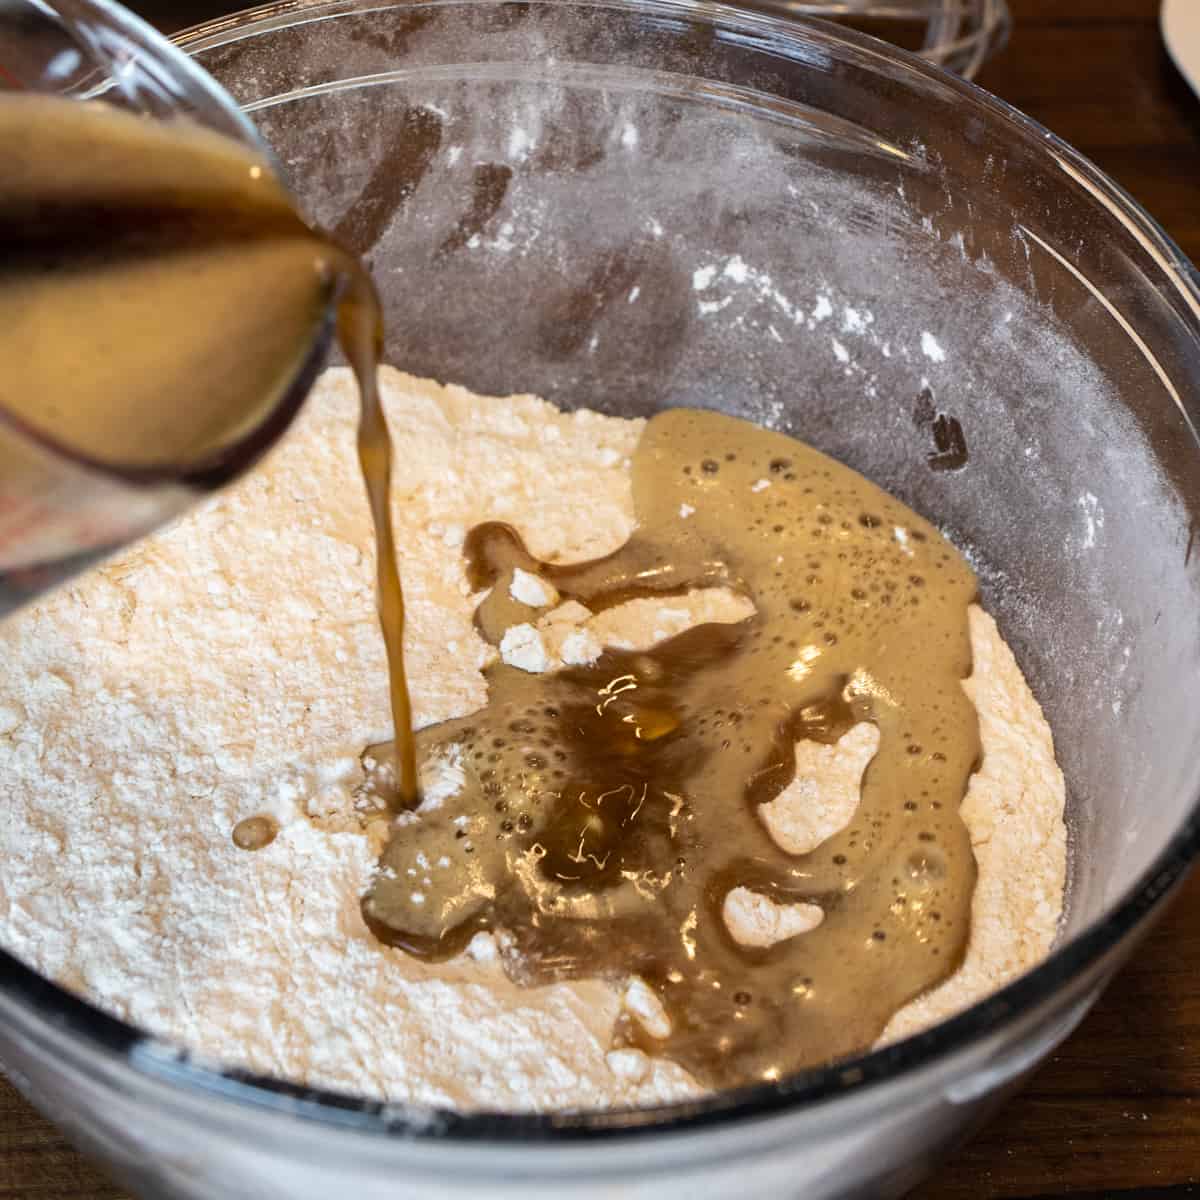 Pouring beer into a glass bowl with dry ingredients.